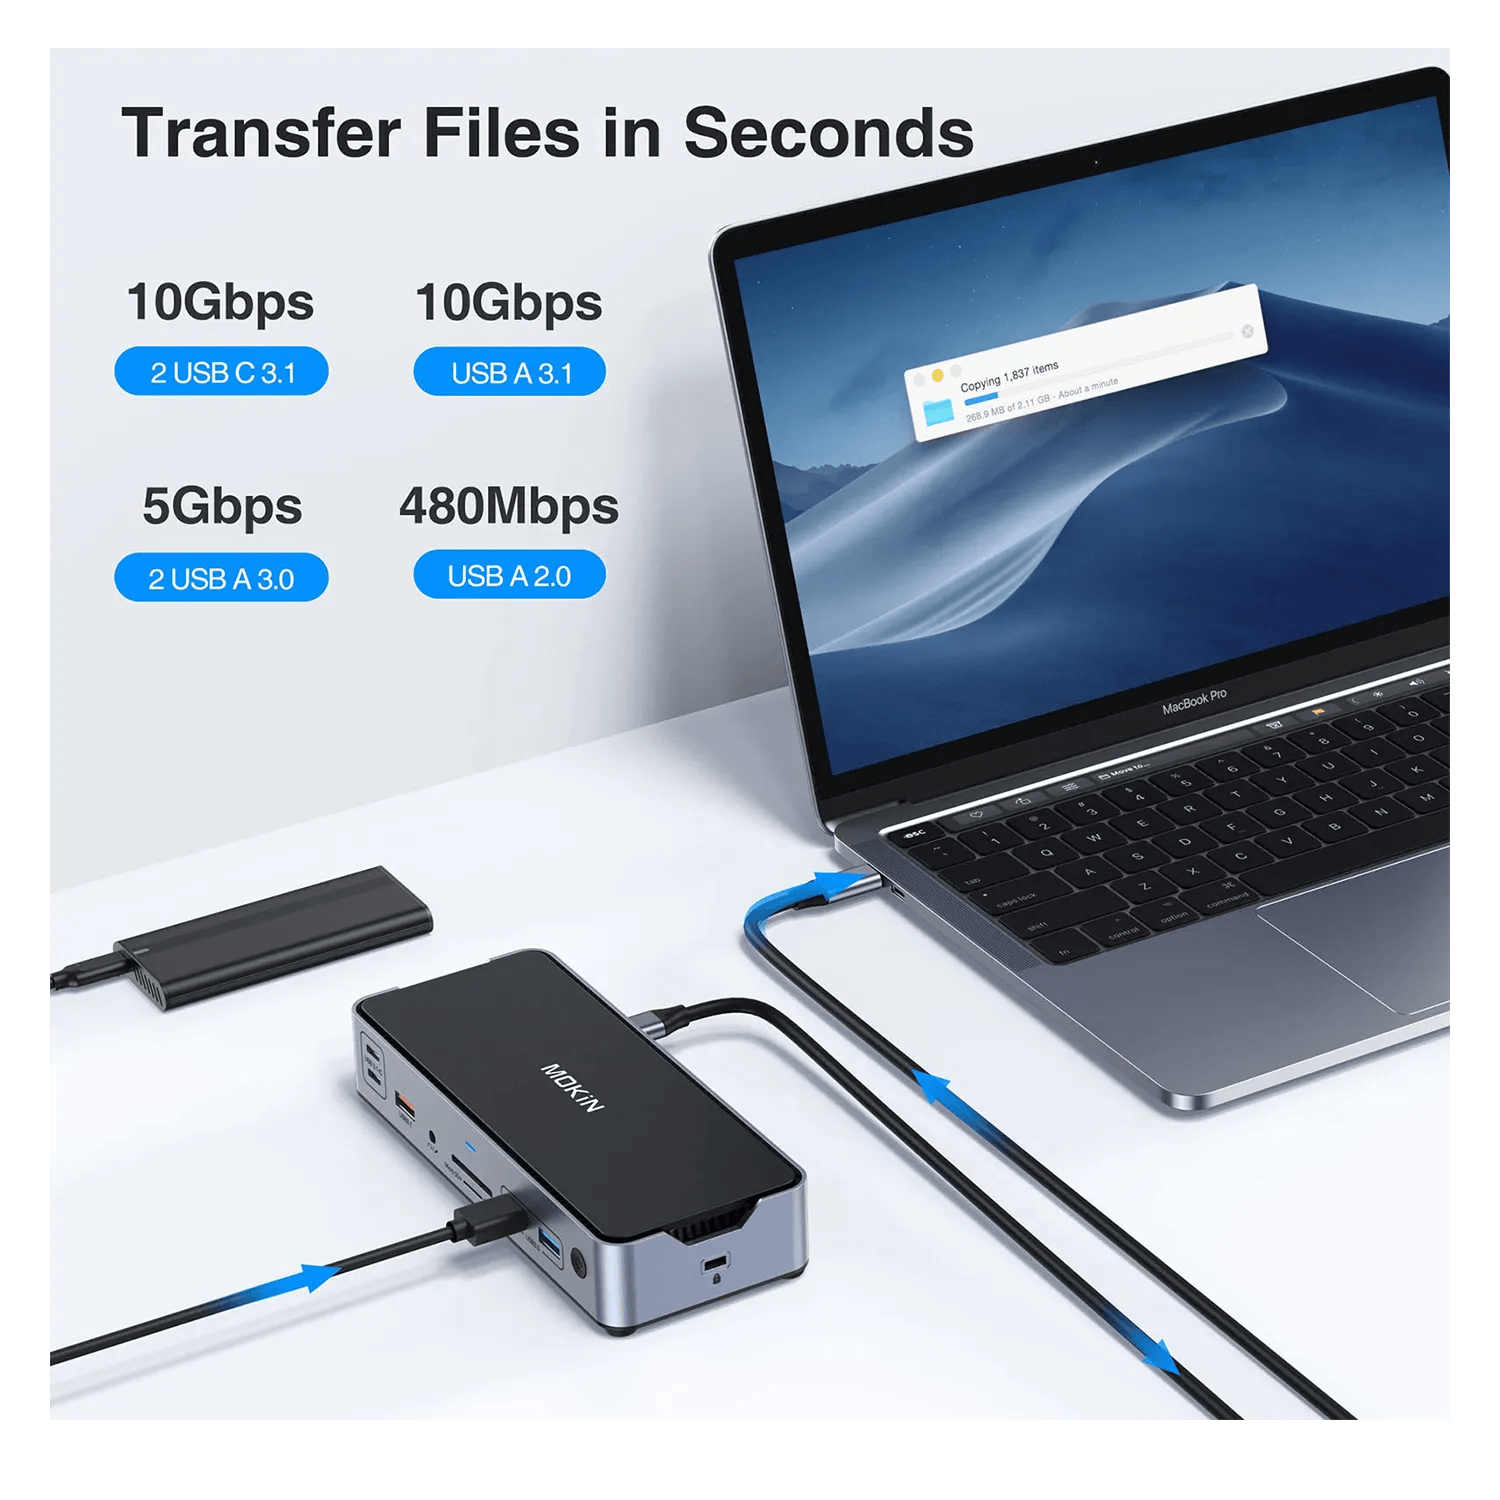 This USB C Dock with dual 10 Gbps USB-C 3.1 port, a 10 Gbps USB-A 3.1 port, dual 5 Gbps USB-A 3.0 ports, a 480Mbps USB-A 2.0 port, and 104 MB/s TF / SD card slots, you can transfer files at high speed using various ports. Efficient and stable transfer of data, pictures or movies from cell phones and drivers to laptops.